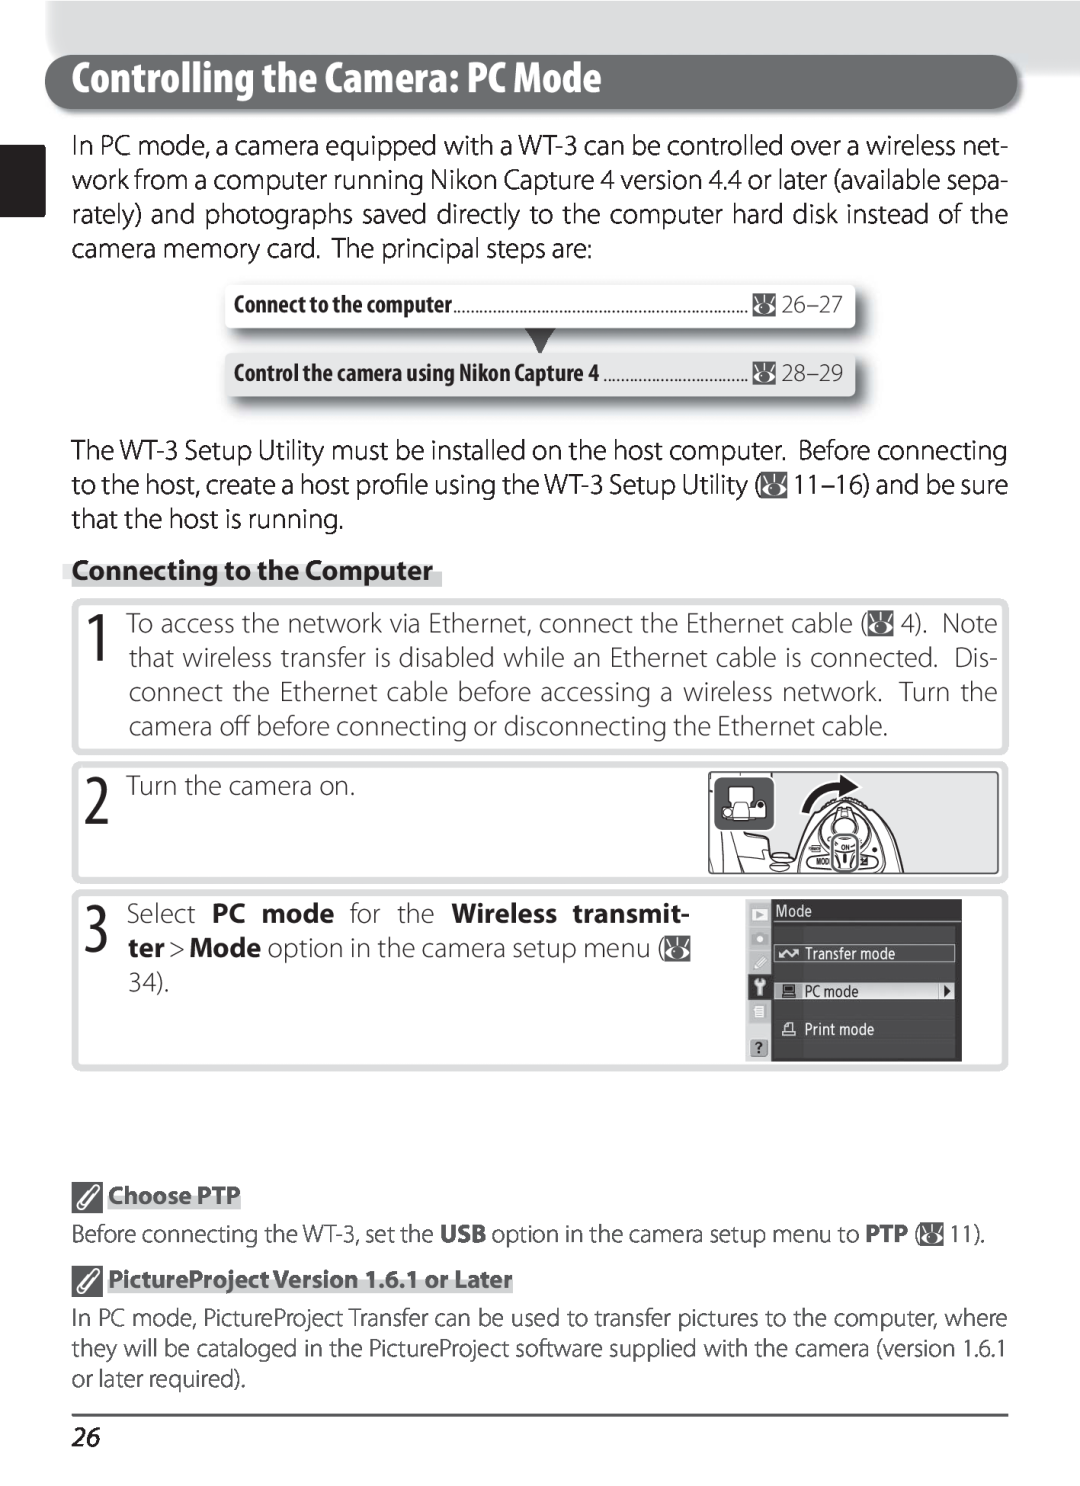 Nikon WT-3 user manual Controlling the Camera PC Mode, Connecting to the Computer, Turn the camera on, Choose PTP 